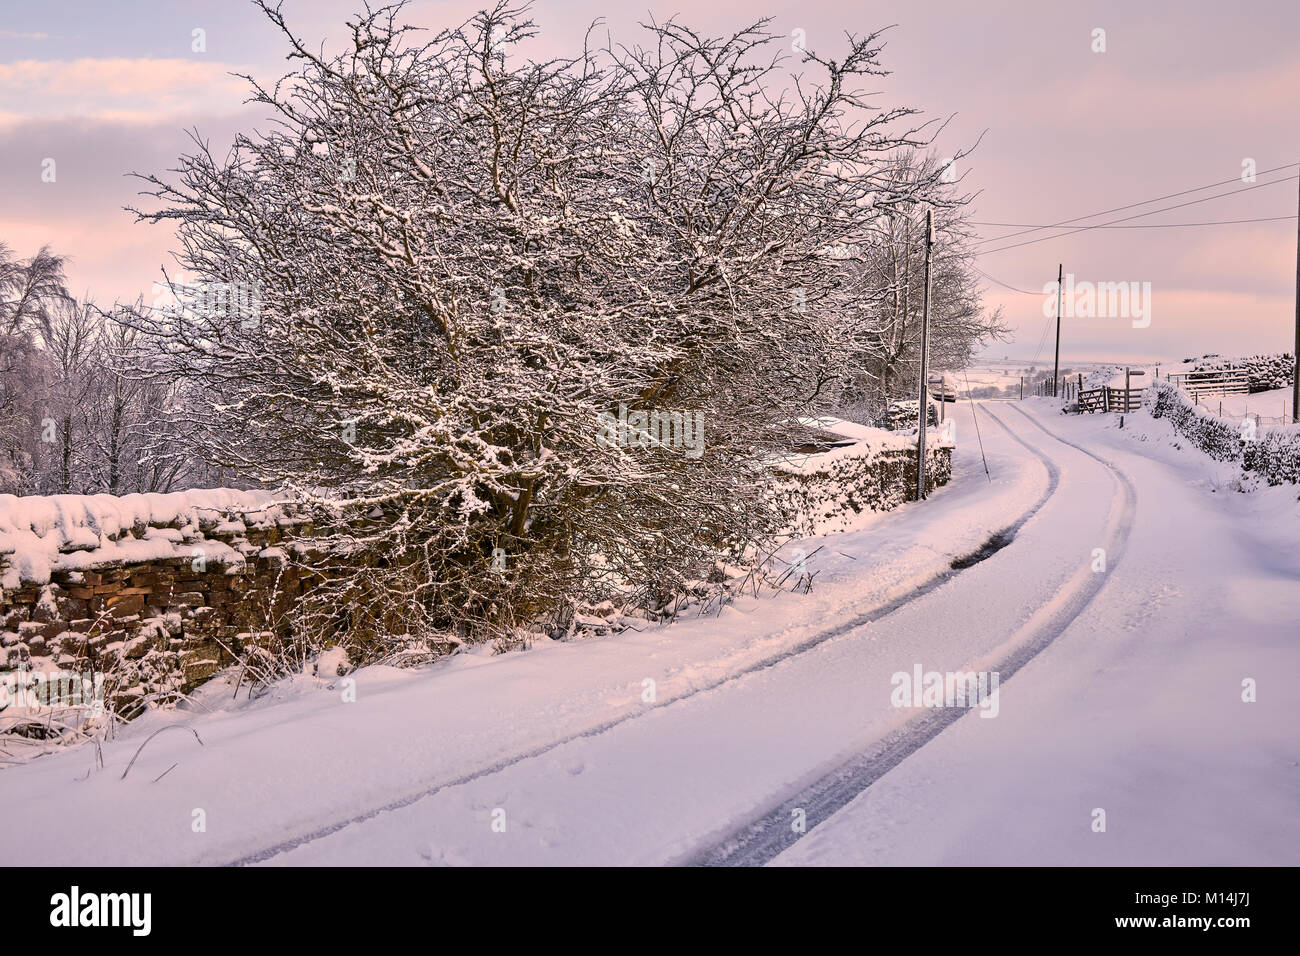 Snow laden Hawthorne and snow covered Peat Lane with single vehicle tracks. Stock Photo